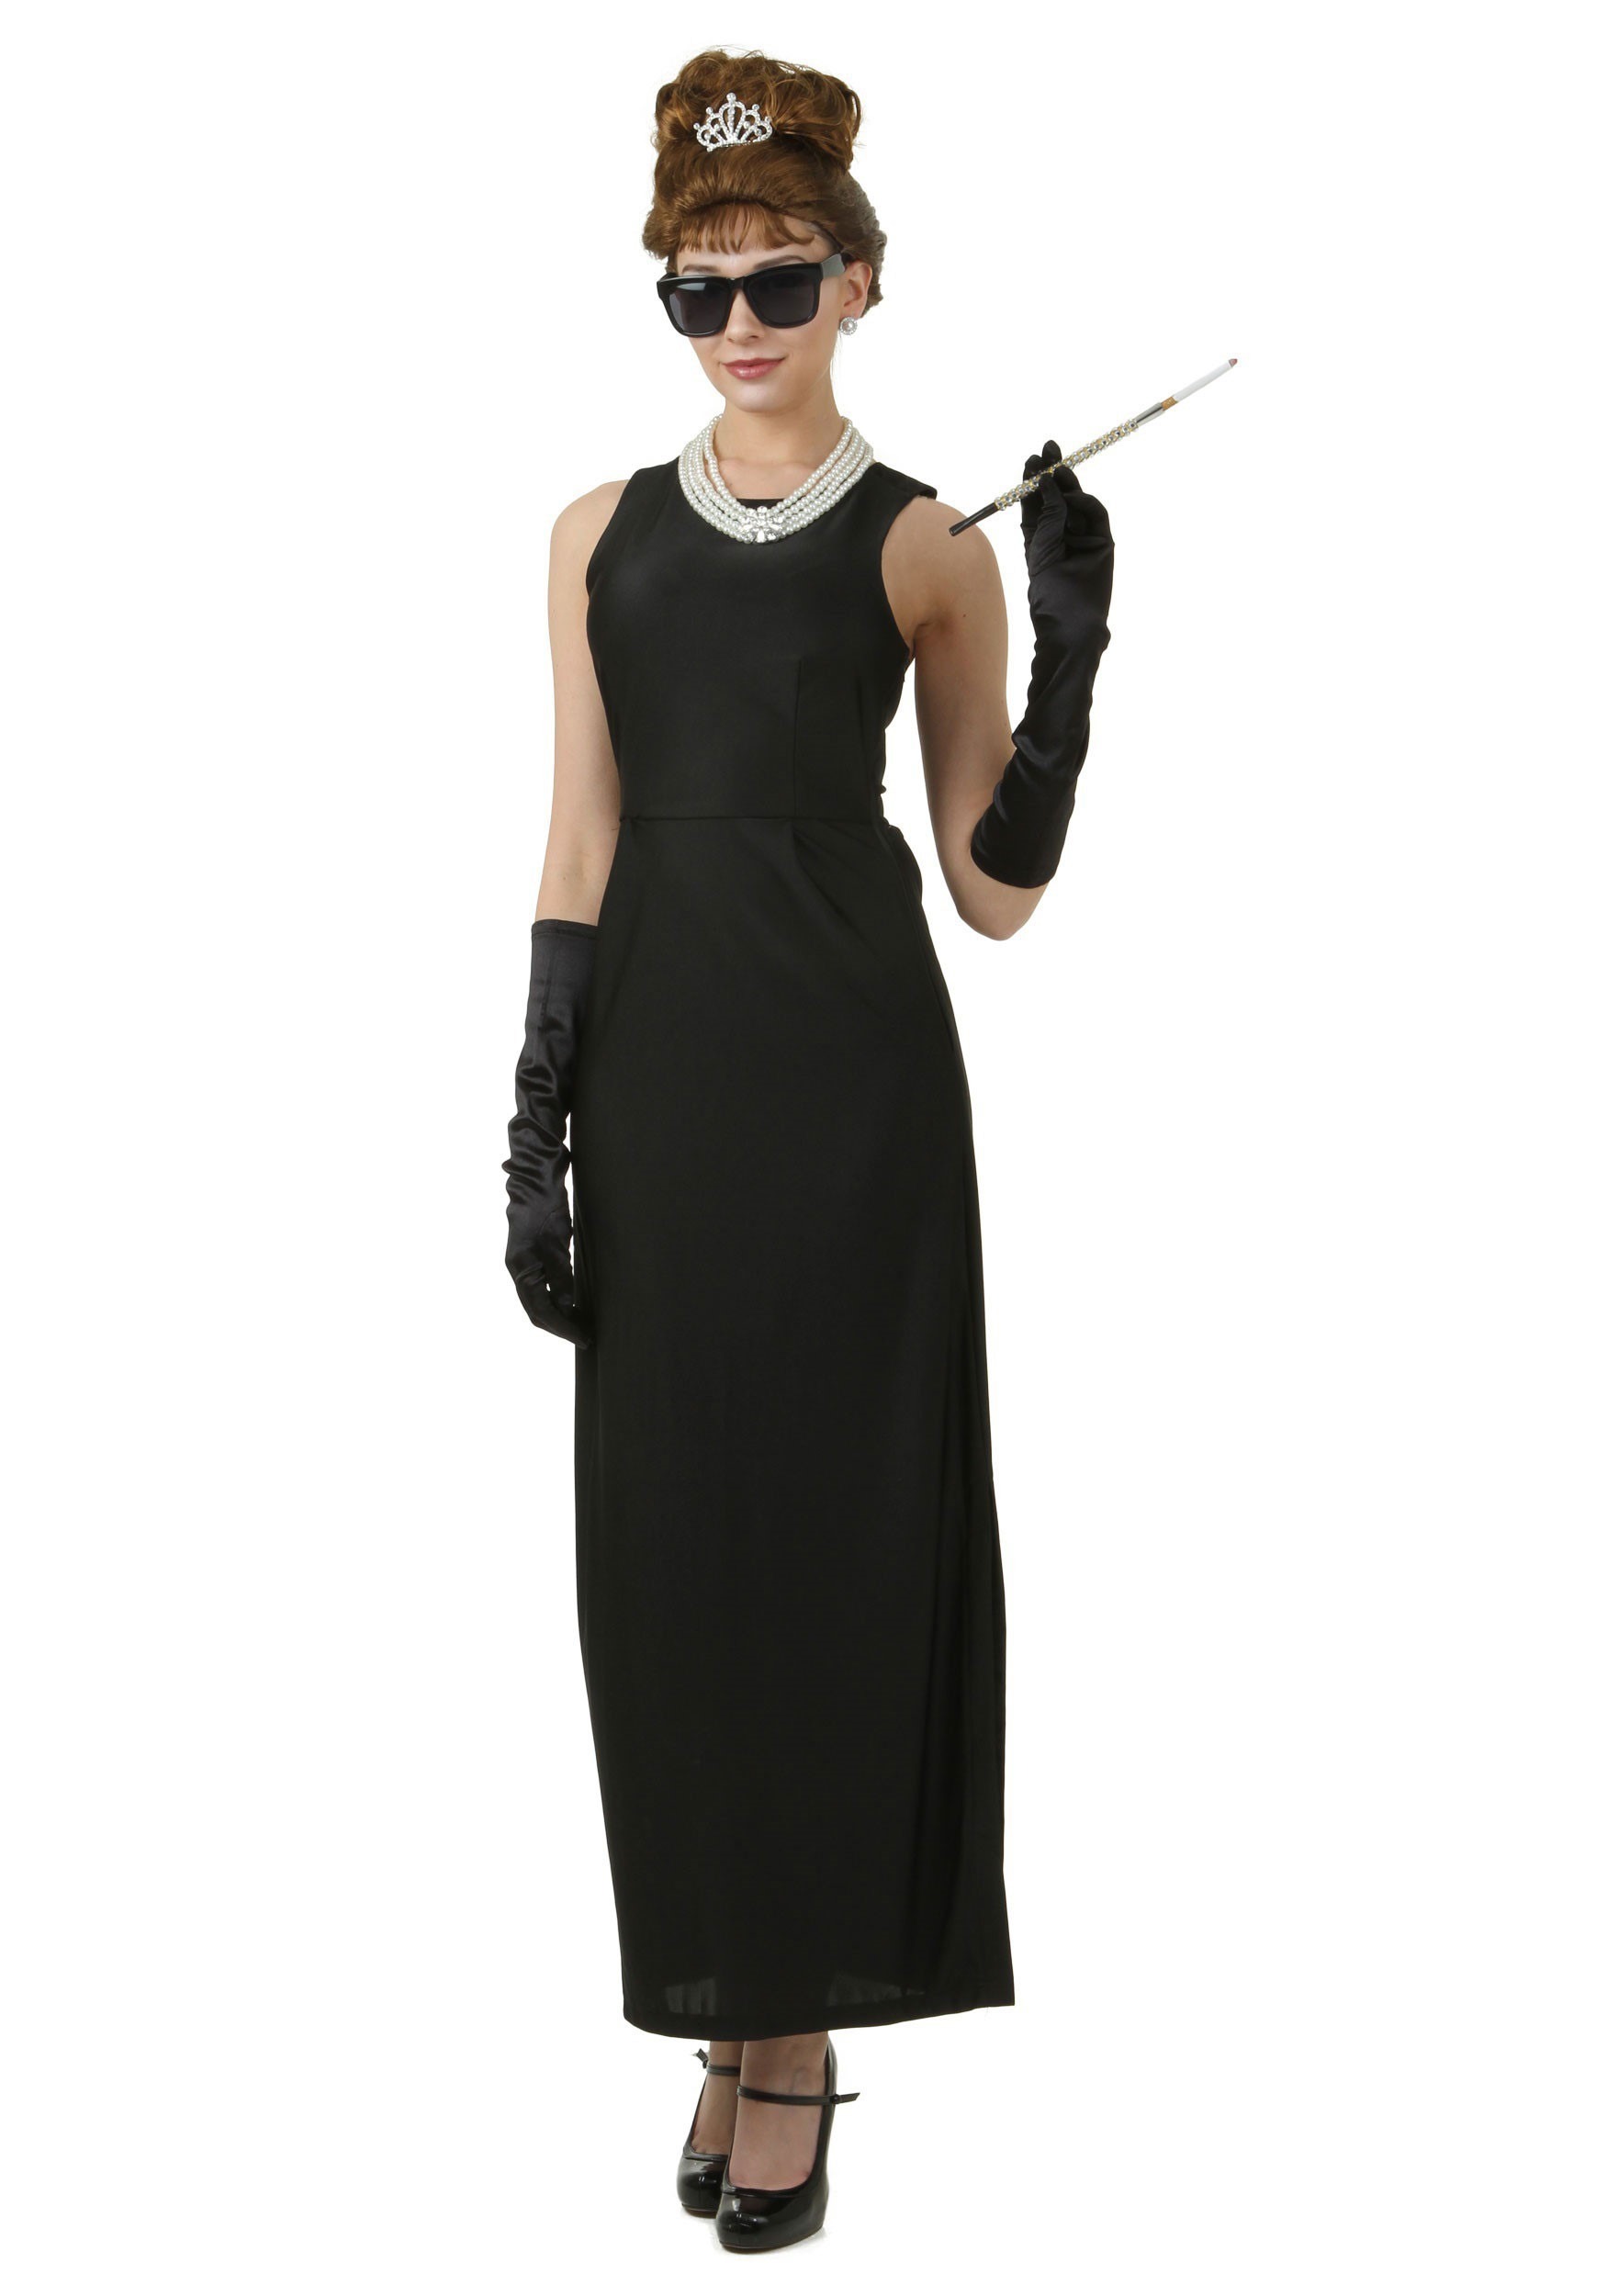 Breakfast at Tiffanys Holly Golightly Costume for Women